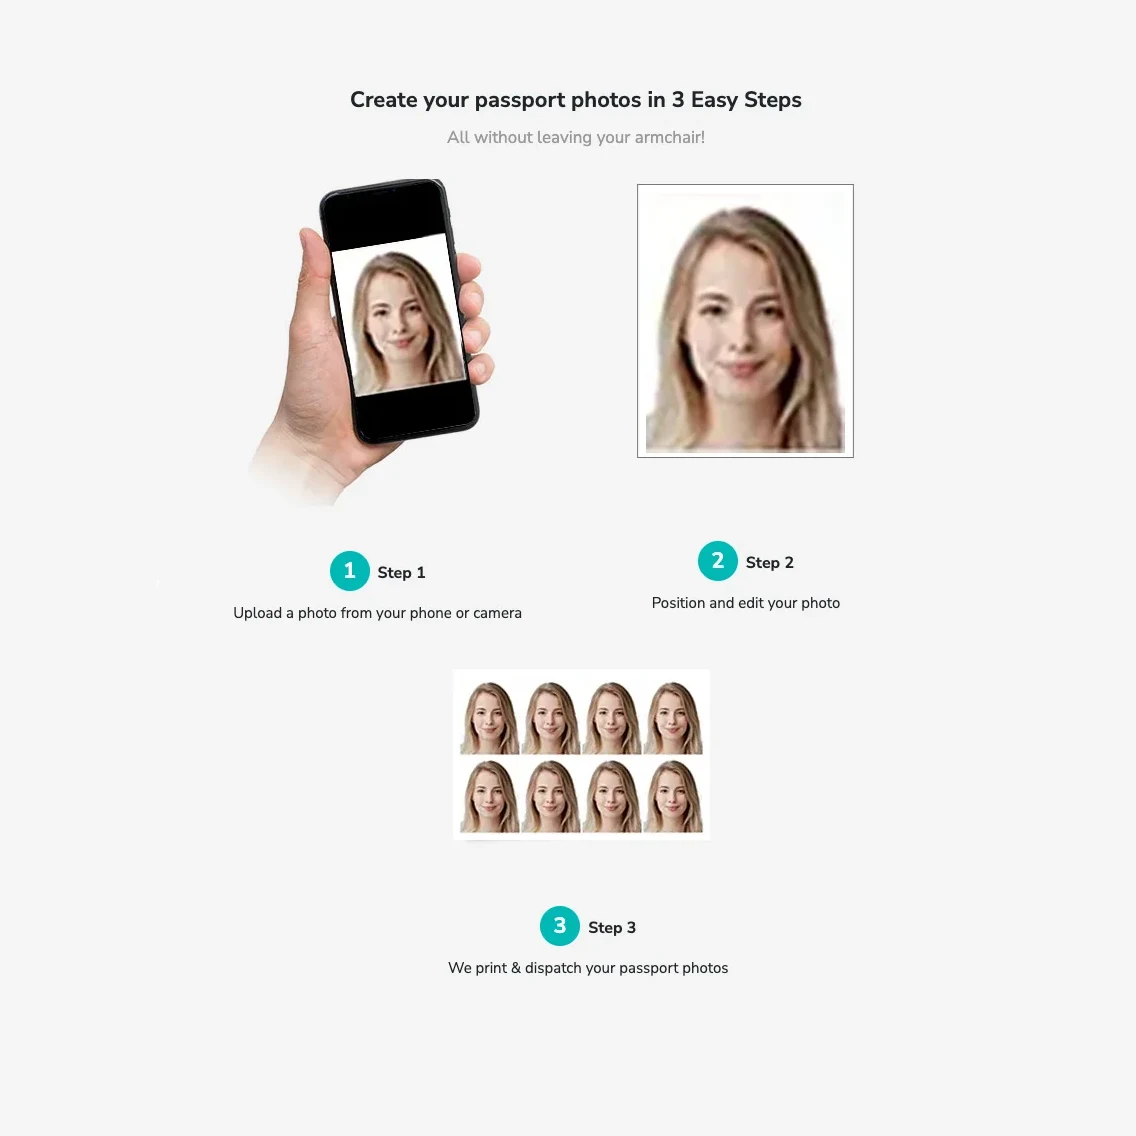 Create Your Passport Photos Online in 3 Easy Steps